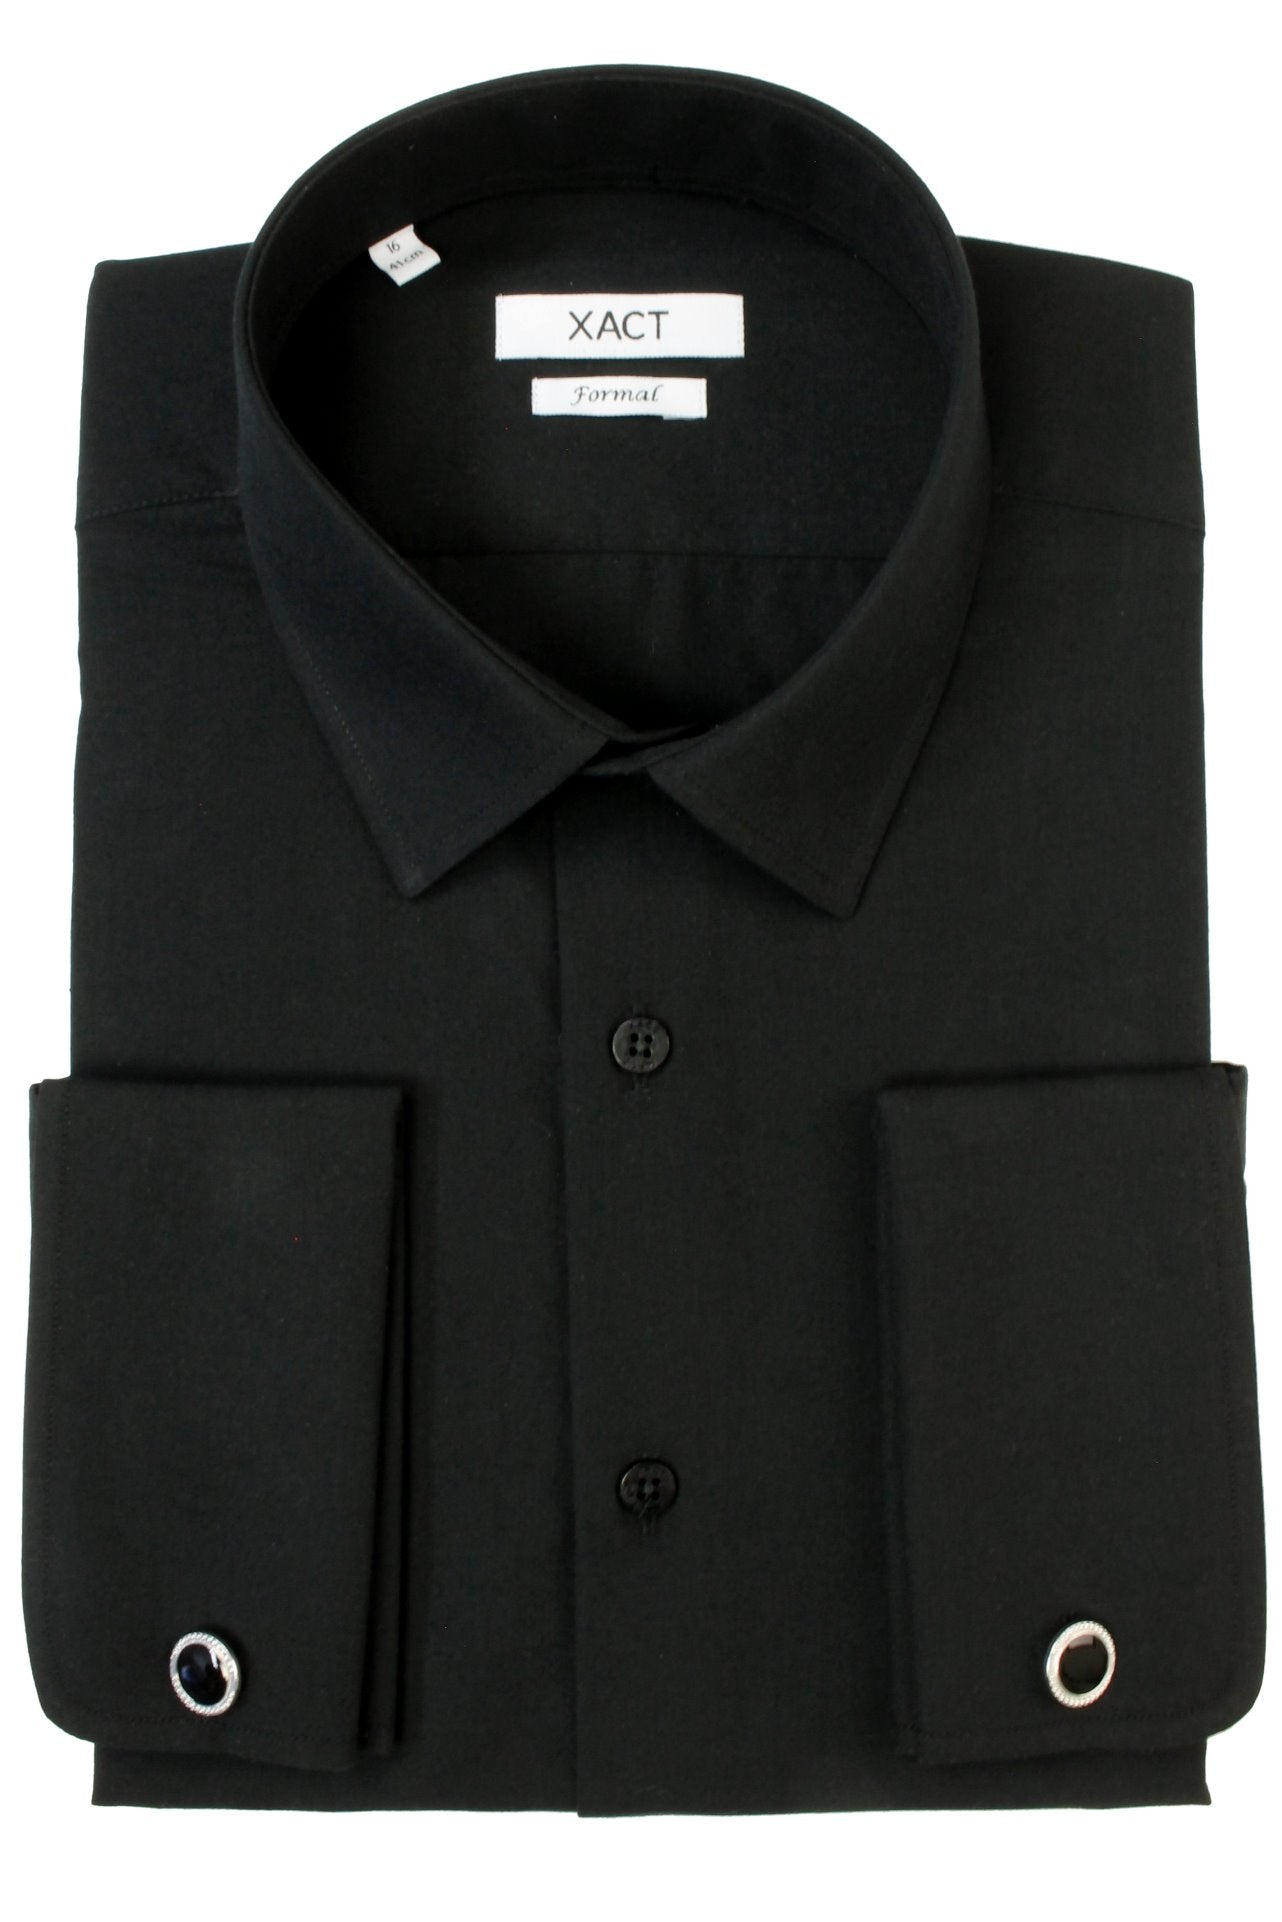 Xact Men's Plain Poplin Formal Shirt with Double/ French Cuff and Cuff Links-Main Image